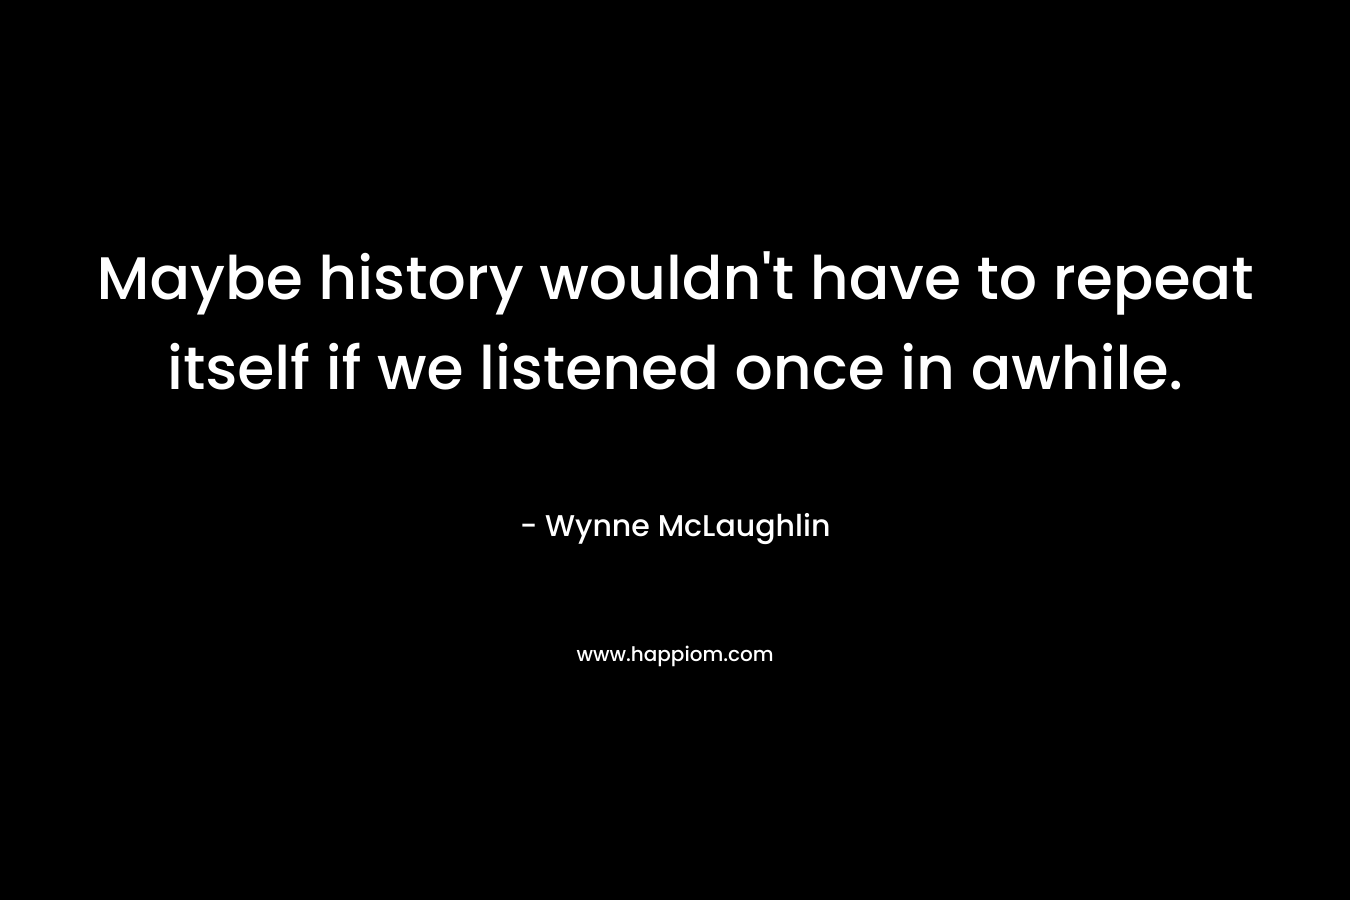 Maybe history wouldn't have to repeat itself if we listened once in awhile.